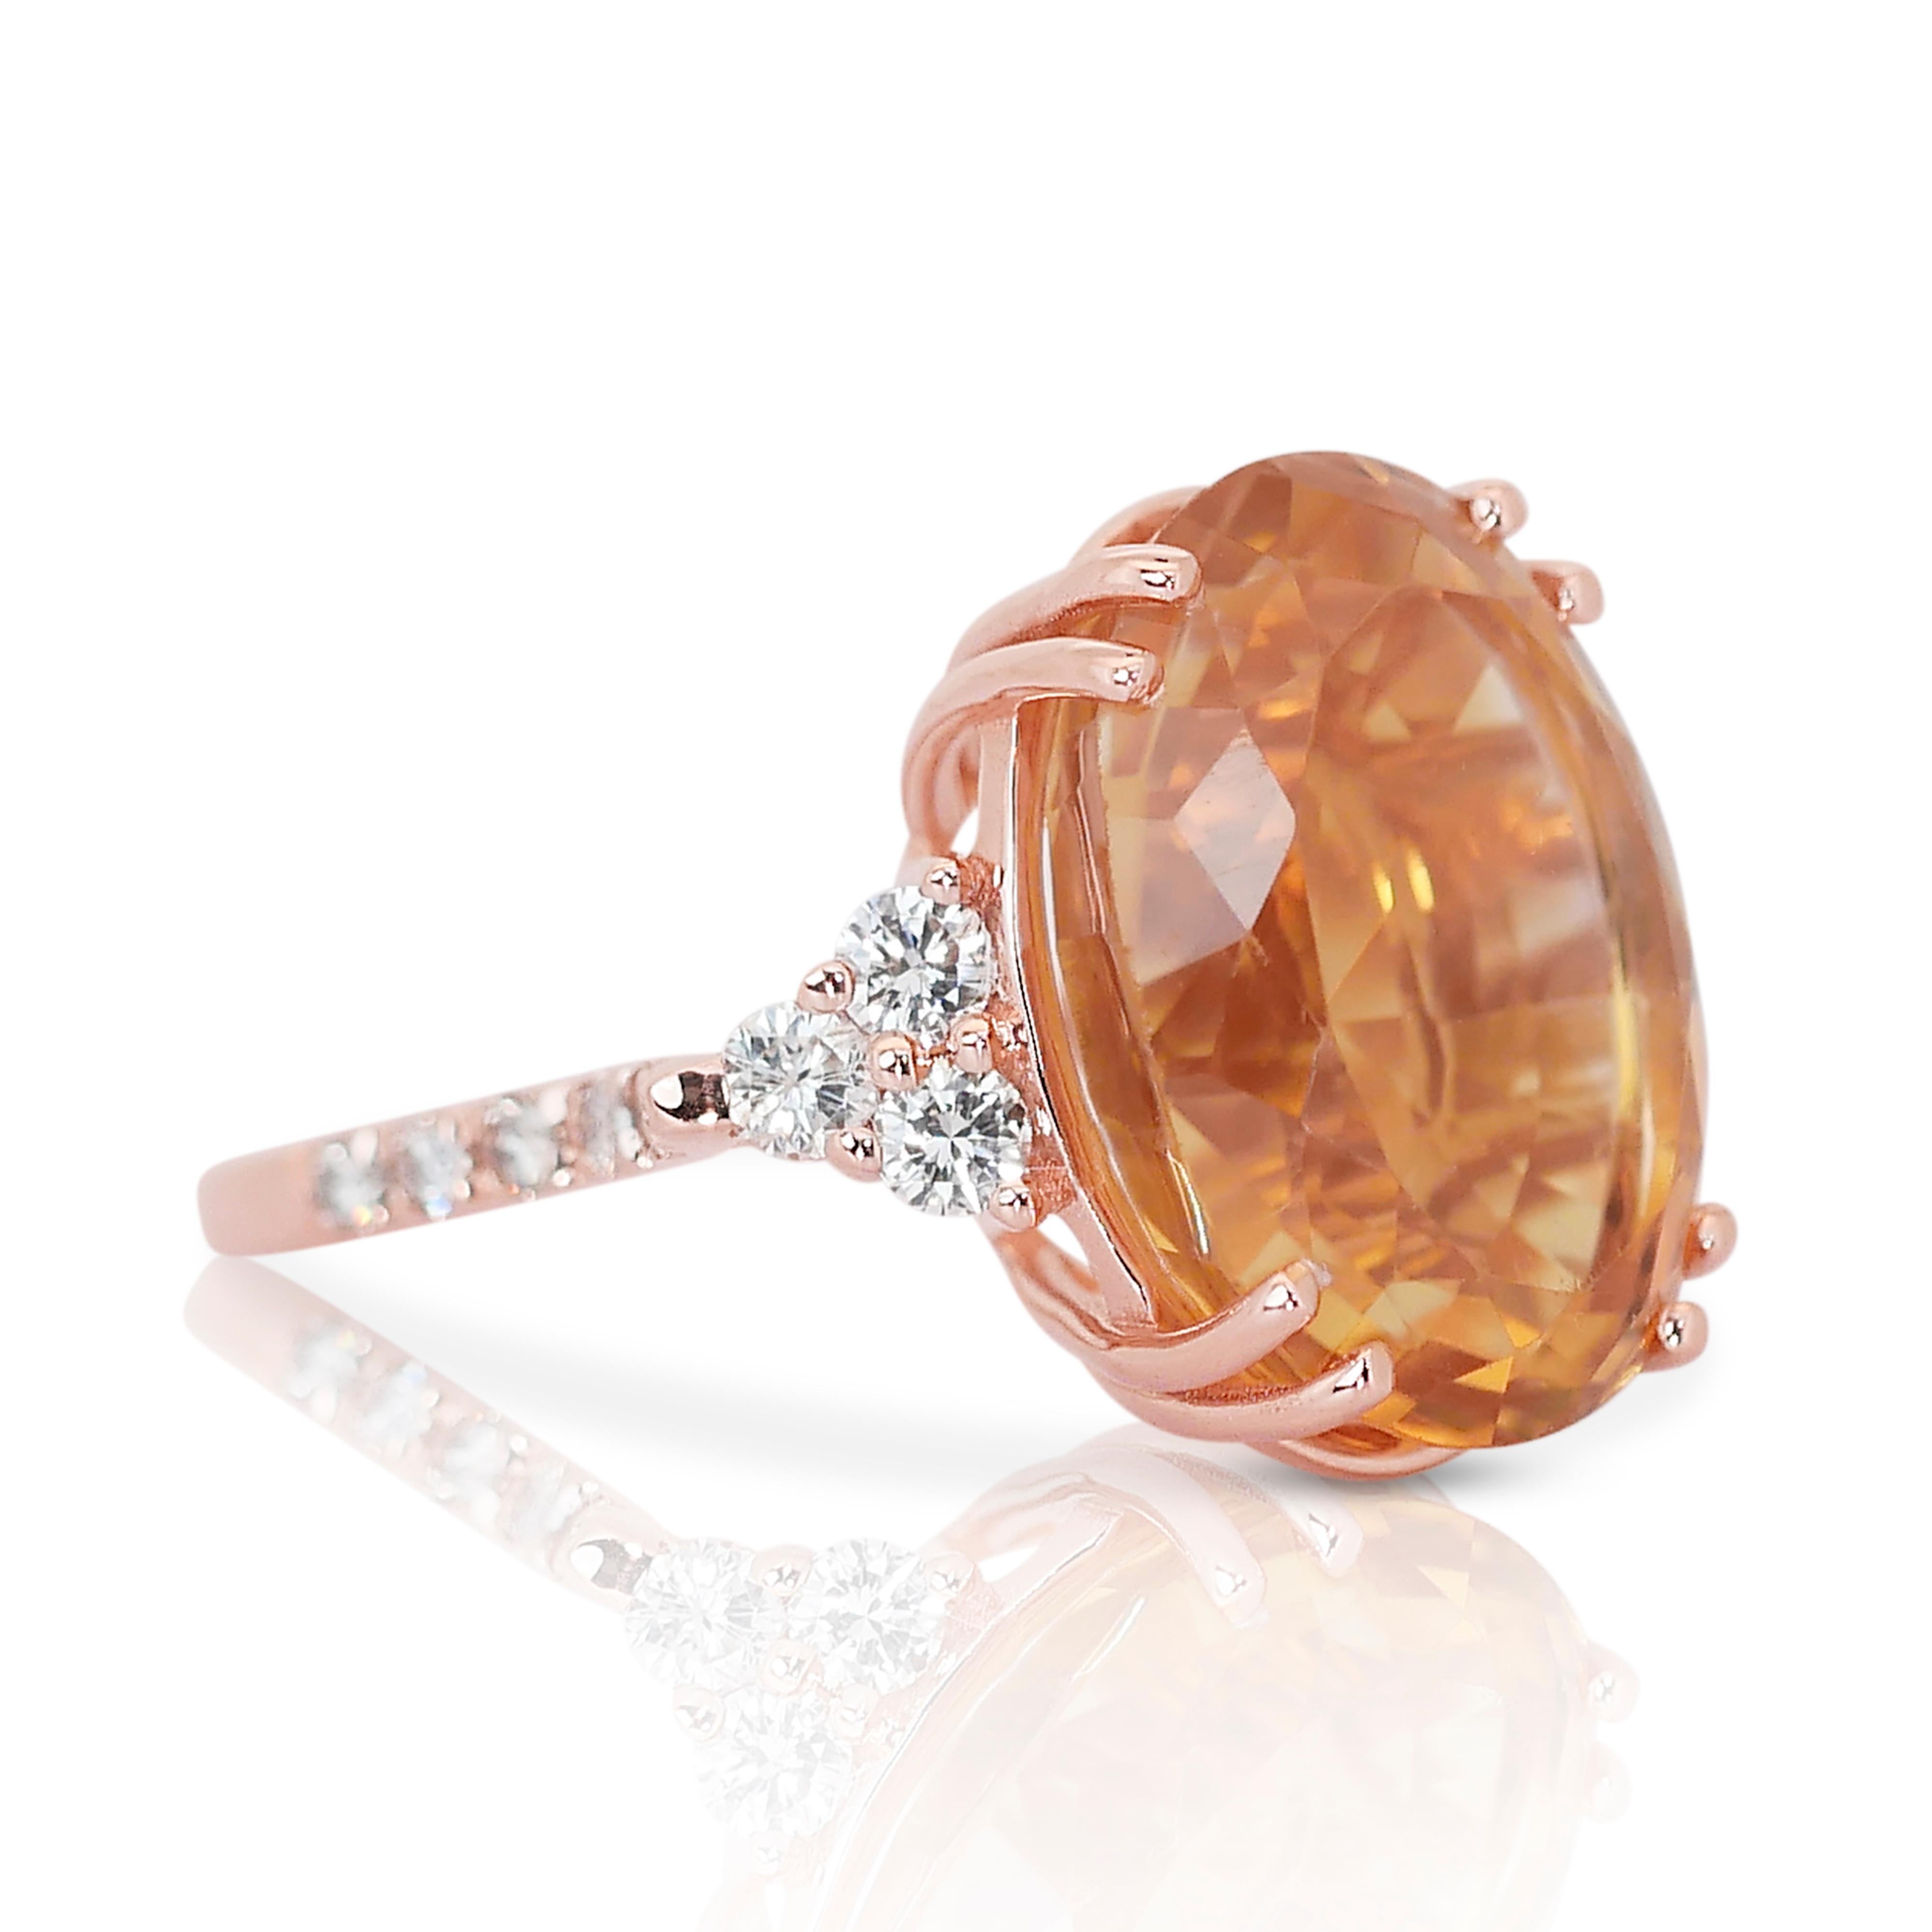 Mixed Cut Gorgeous 14K Rose Gold Citrine and Diamond Dome Ring w/10.69 ct - IGI Certified